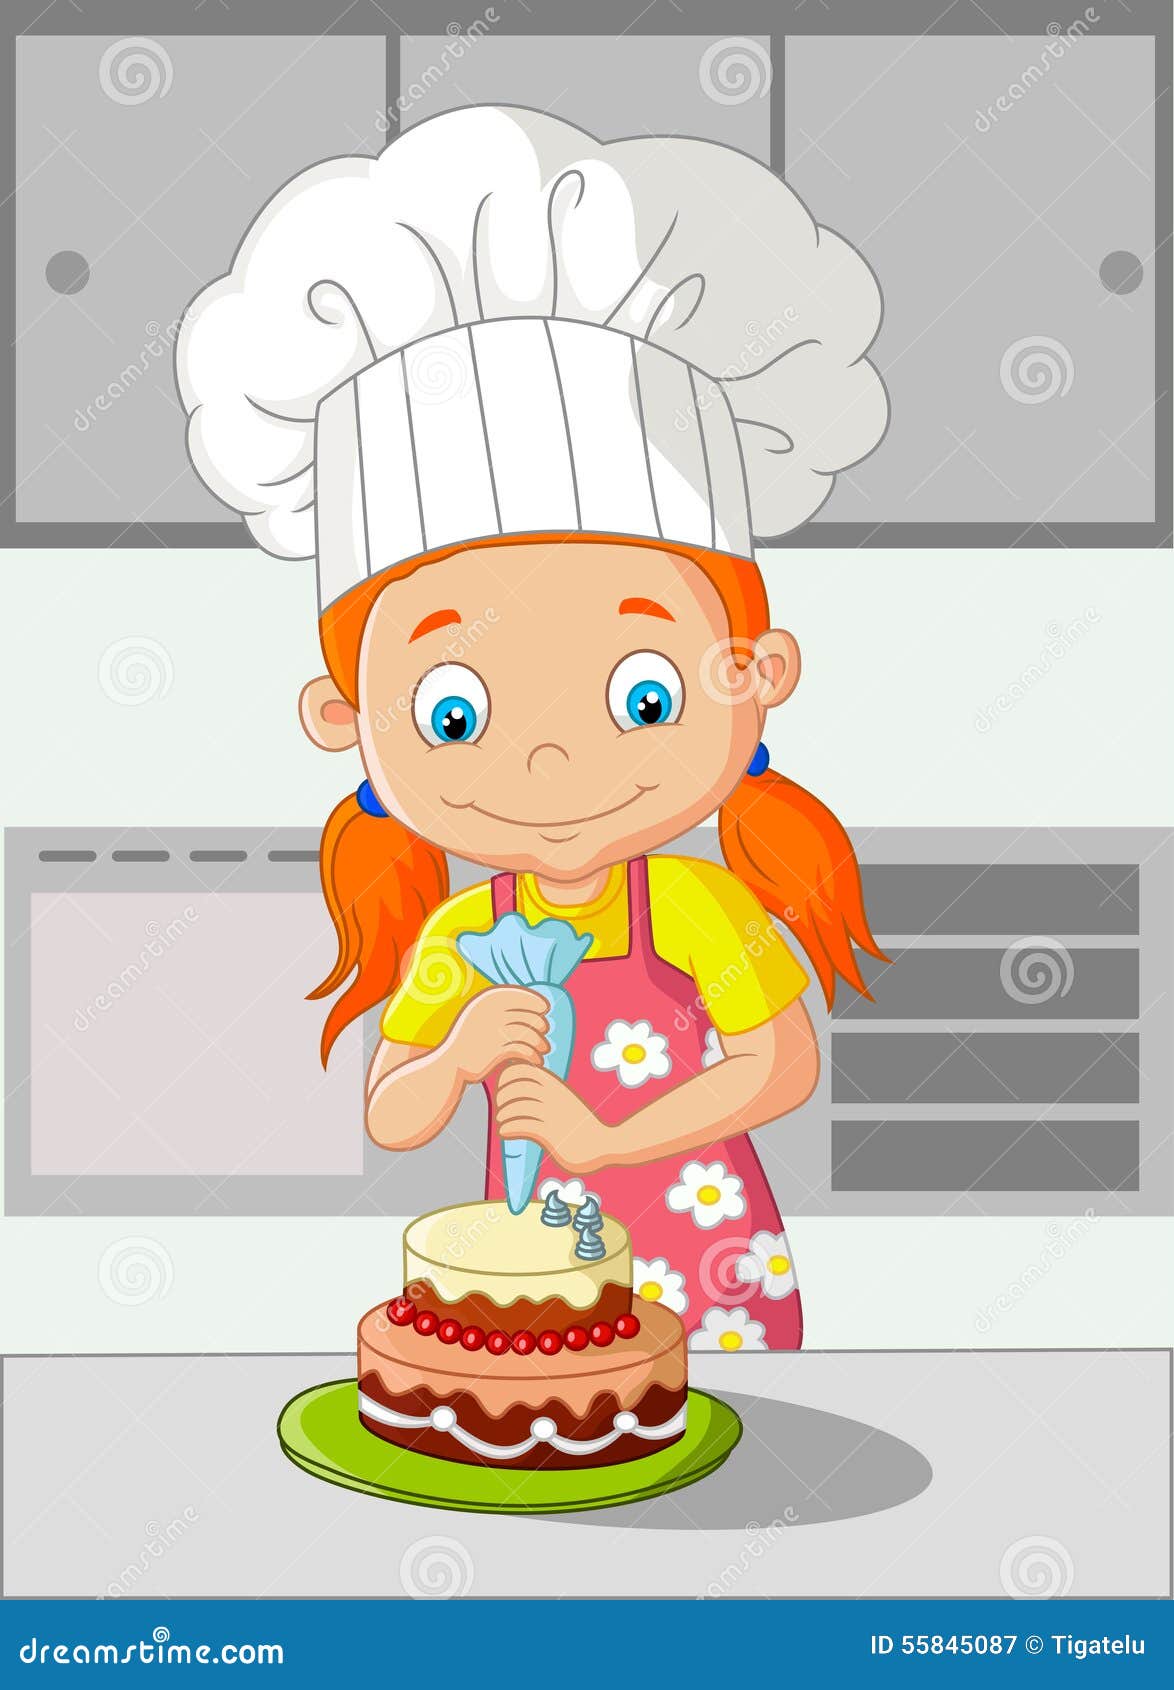 clipart girl cooking - photo #23